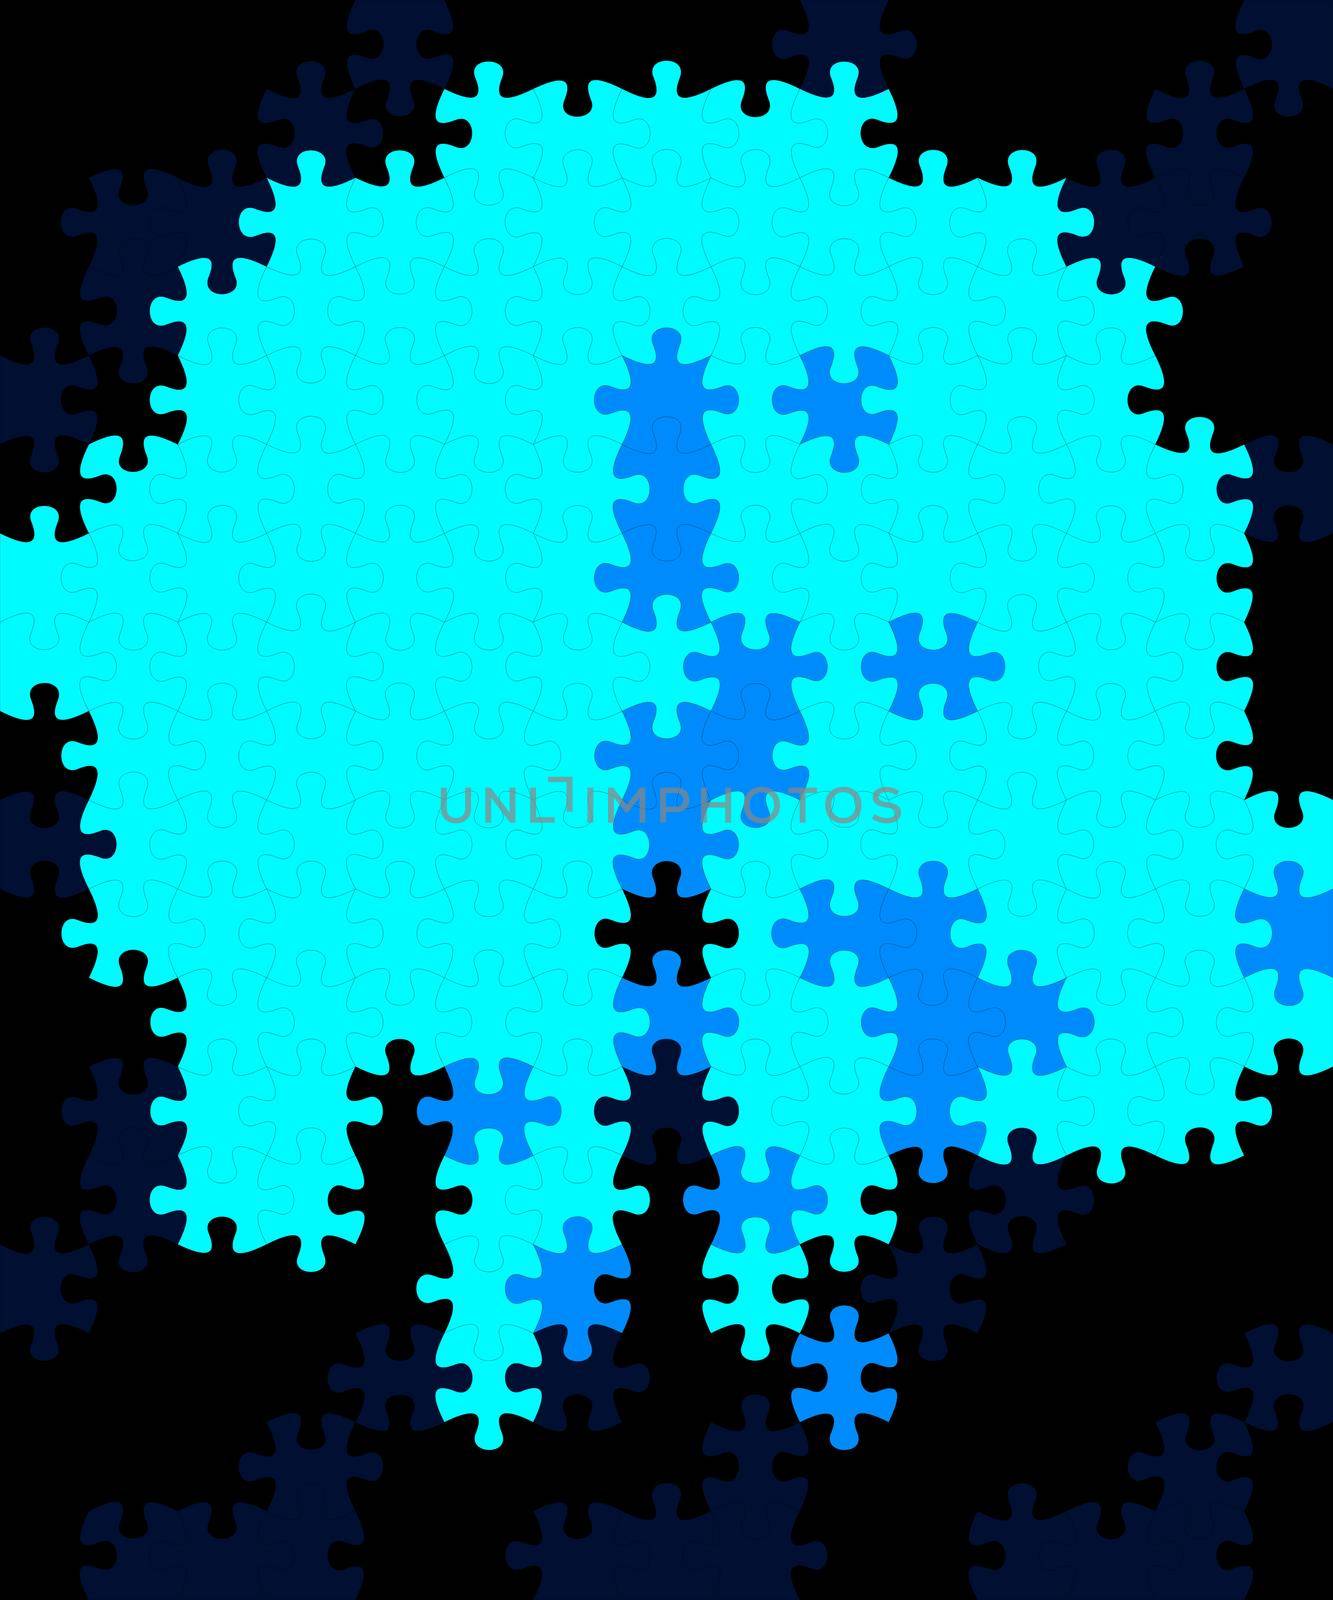 Connected blank puzzle pieces using 4 colors, digitally created by tabishere